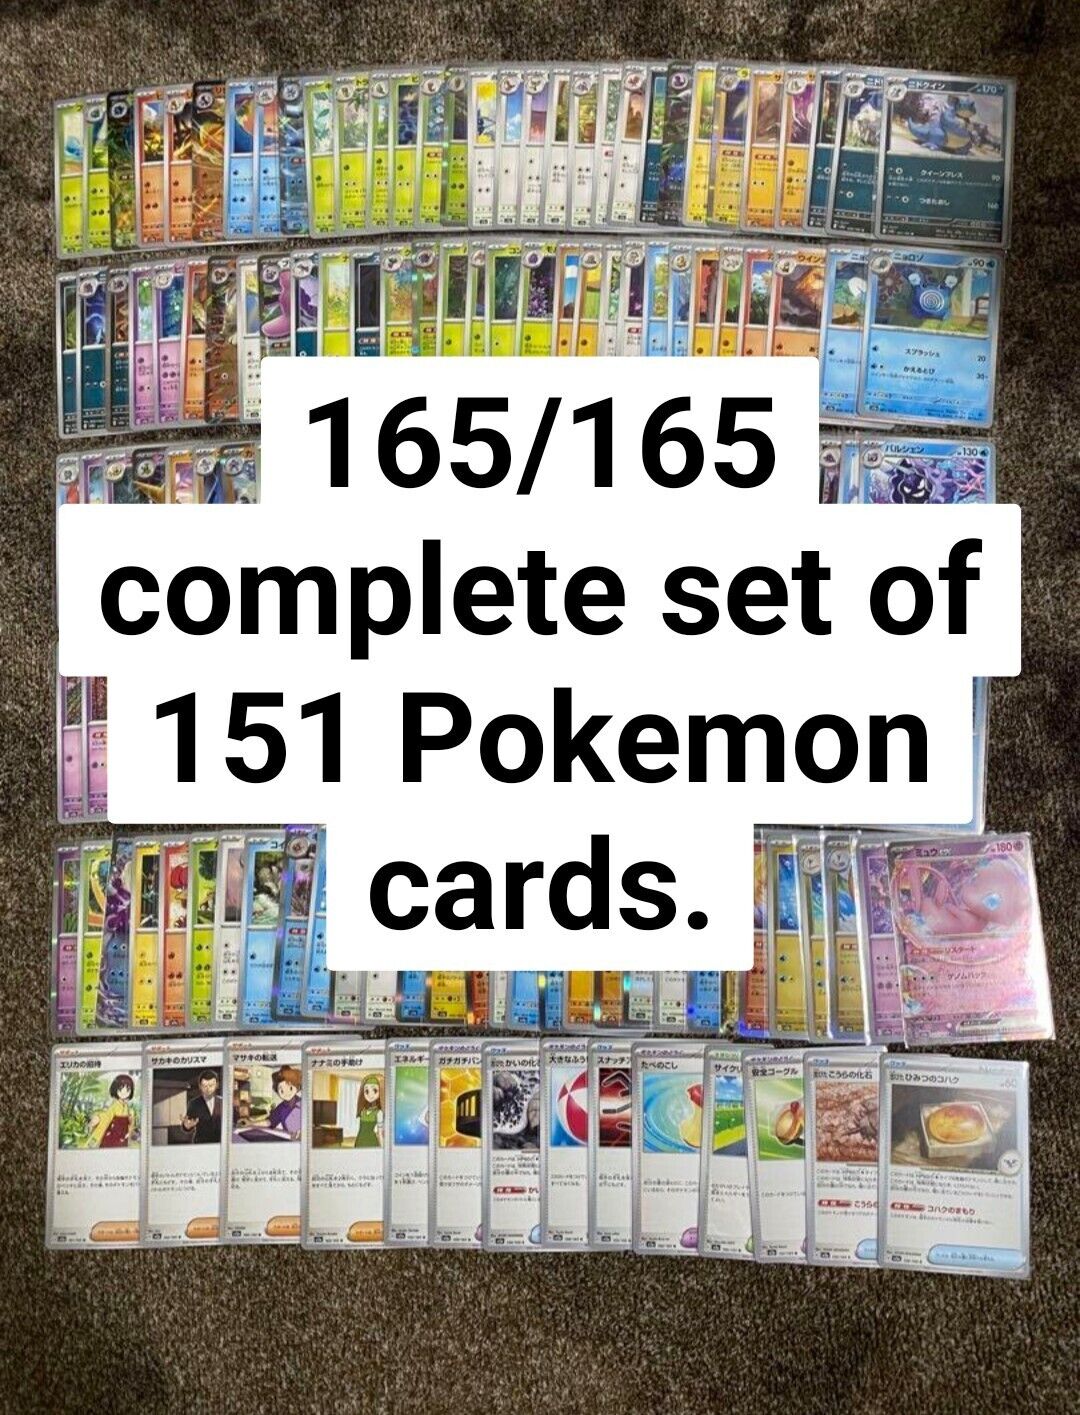 Pokemon All 151 Pokemon cards in the first image+14 support cards total 165cards